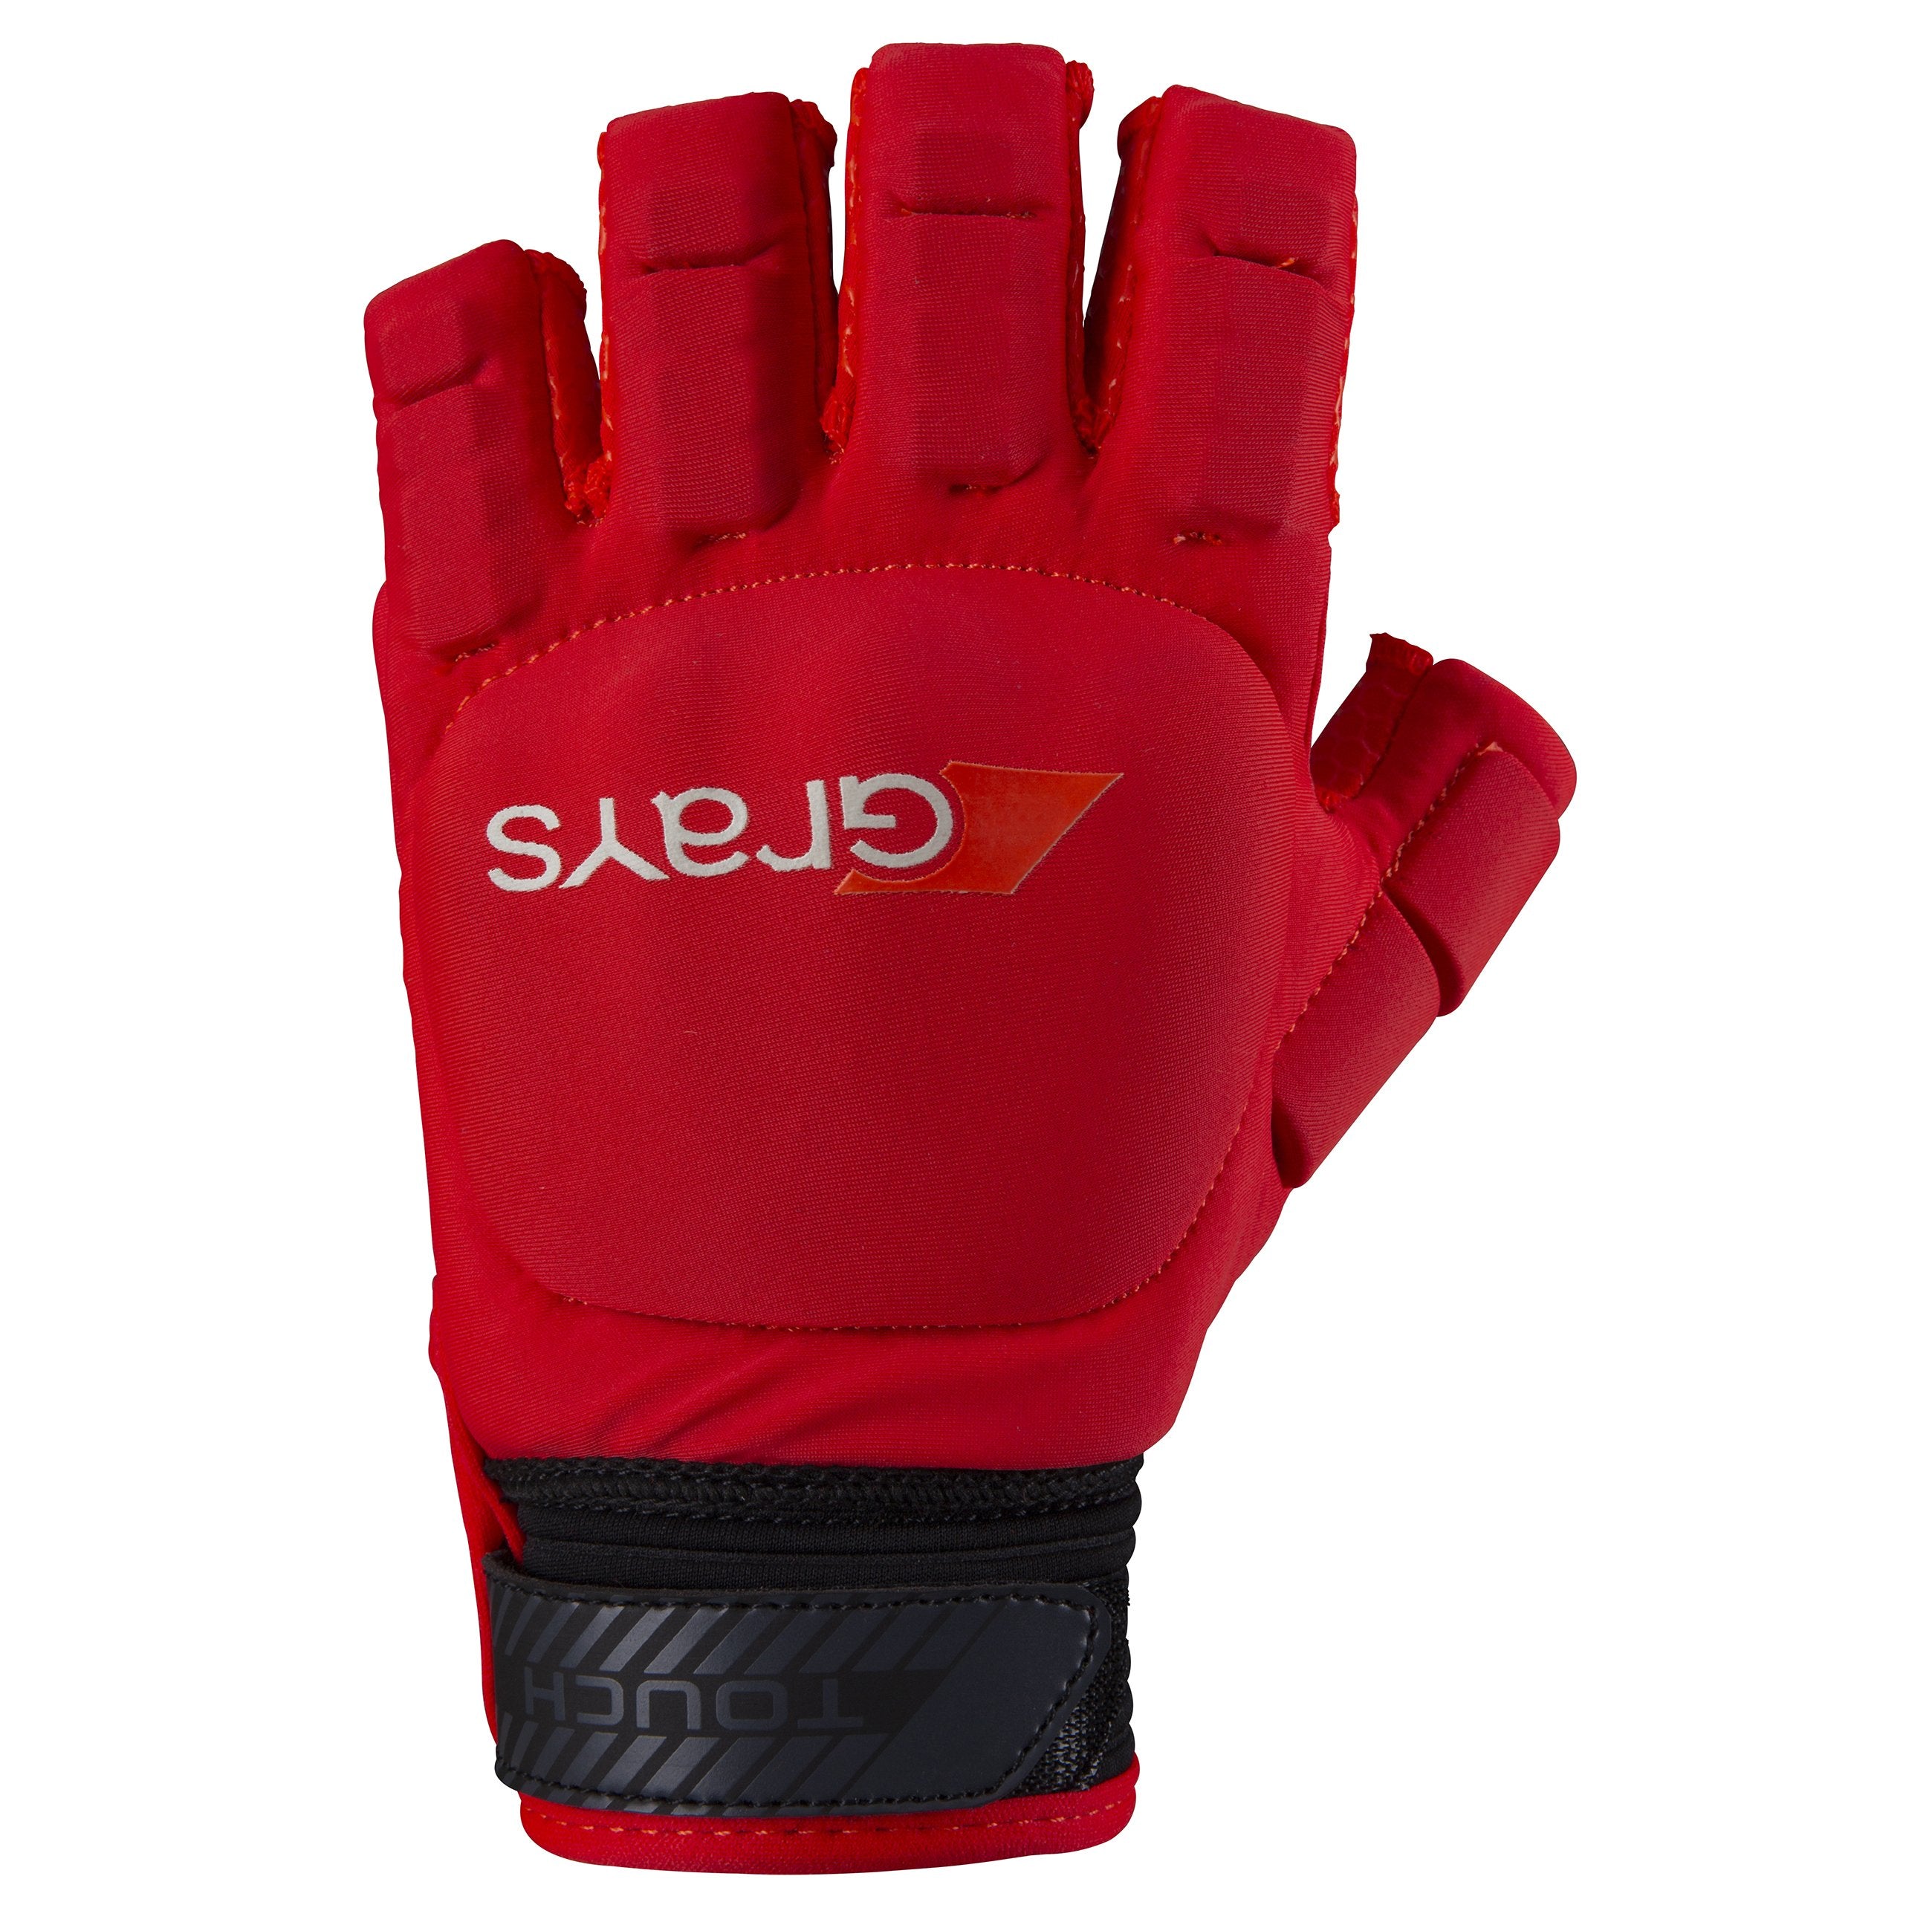 2600 HGFA19 6208905 Glove Touch Fluo Red Left Hand Back